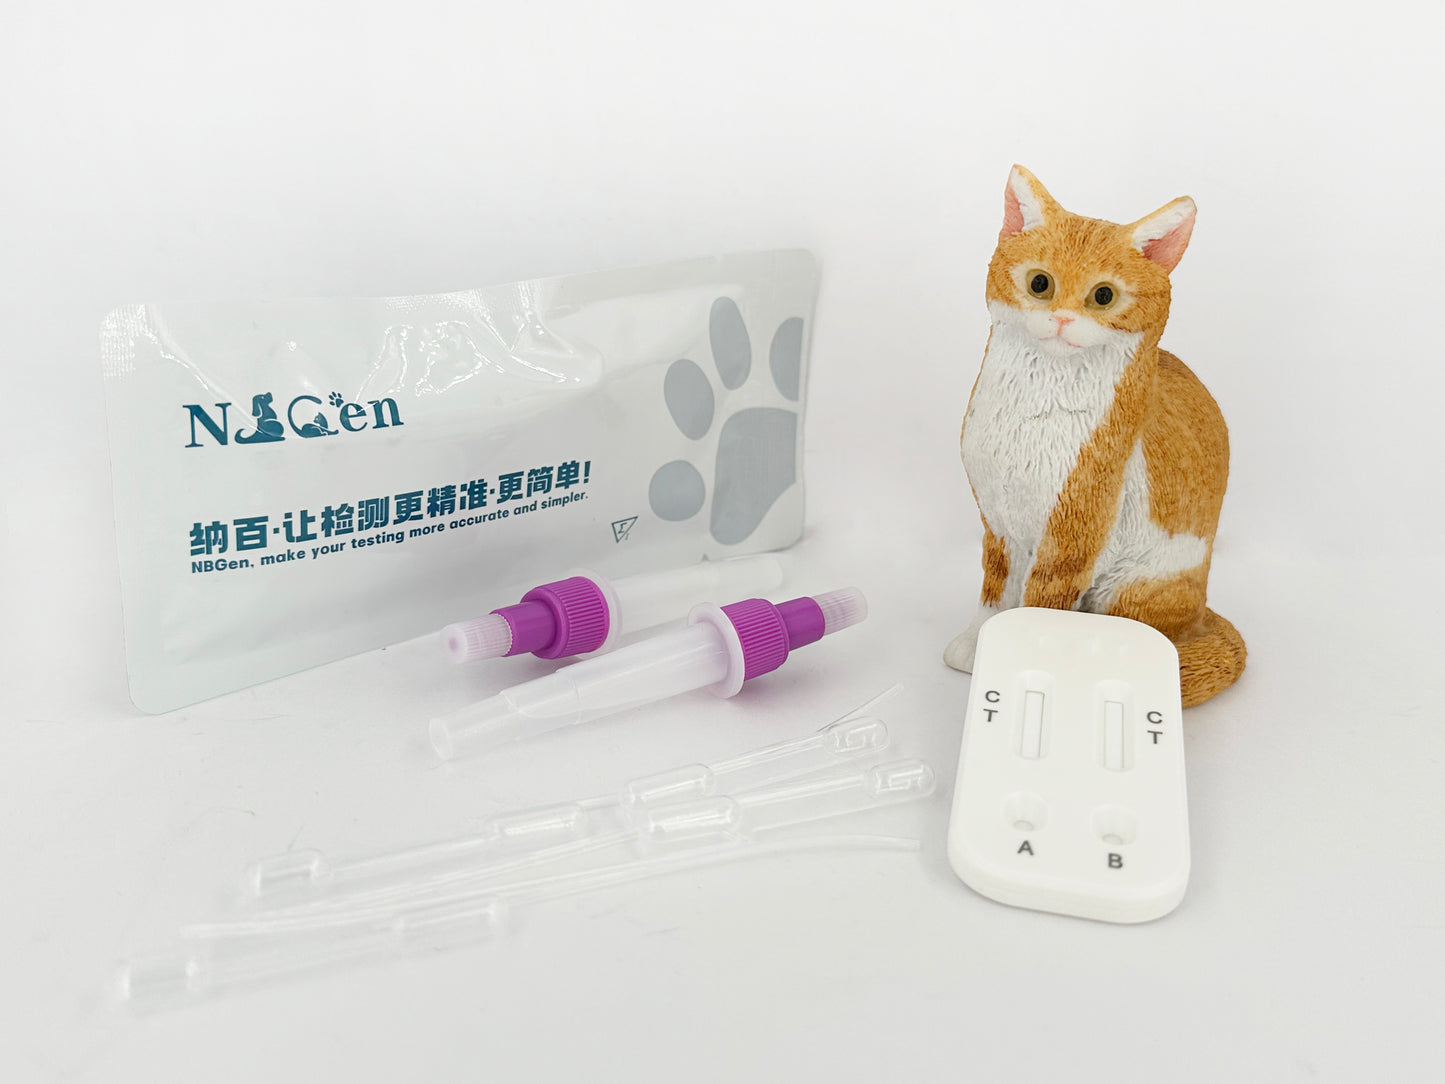 Feline Blood Typing Kit, cat blood typing, type A, B and AB 10tests per pack